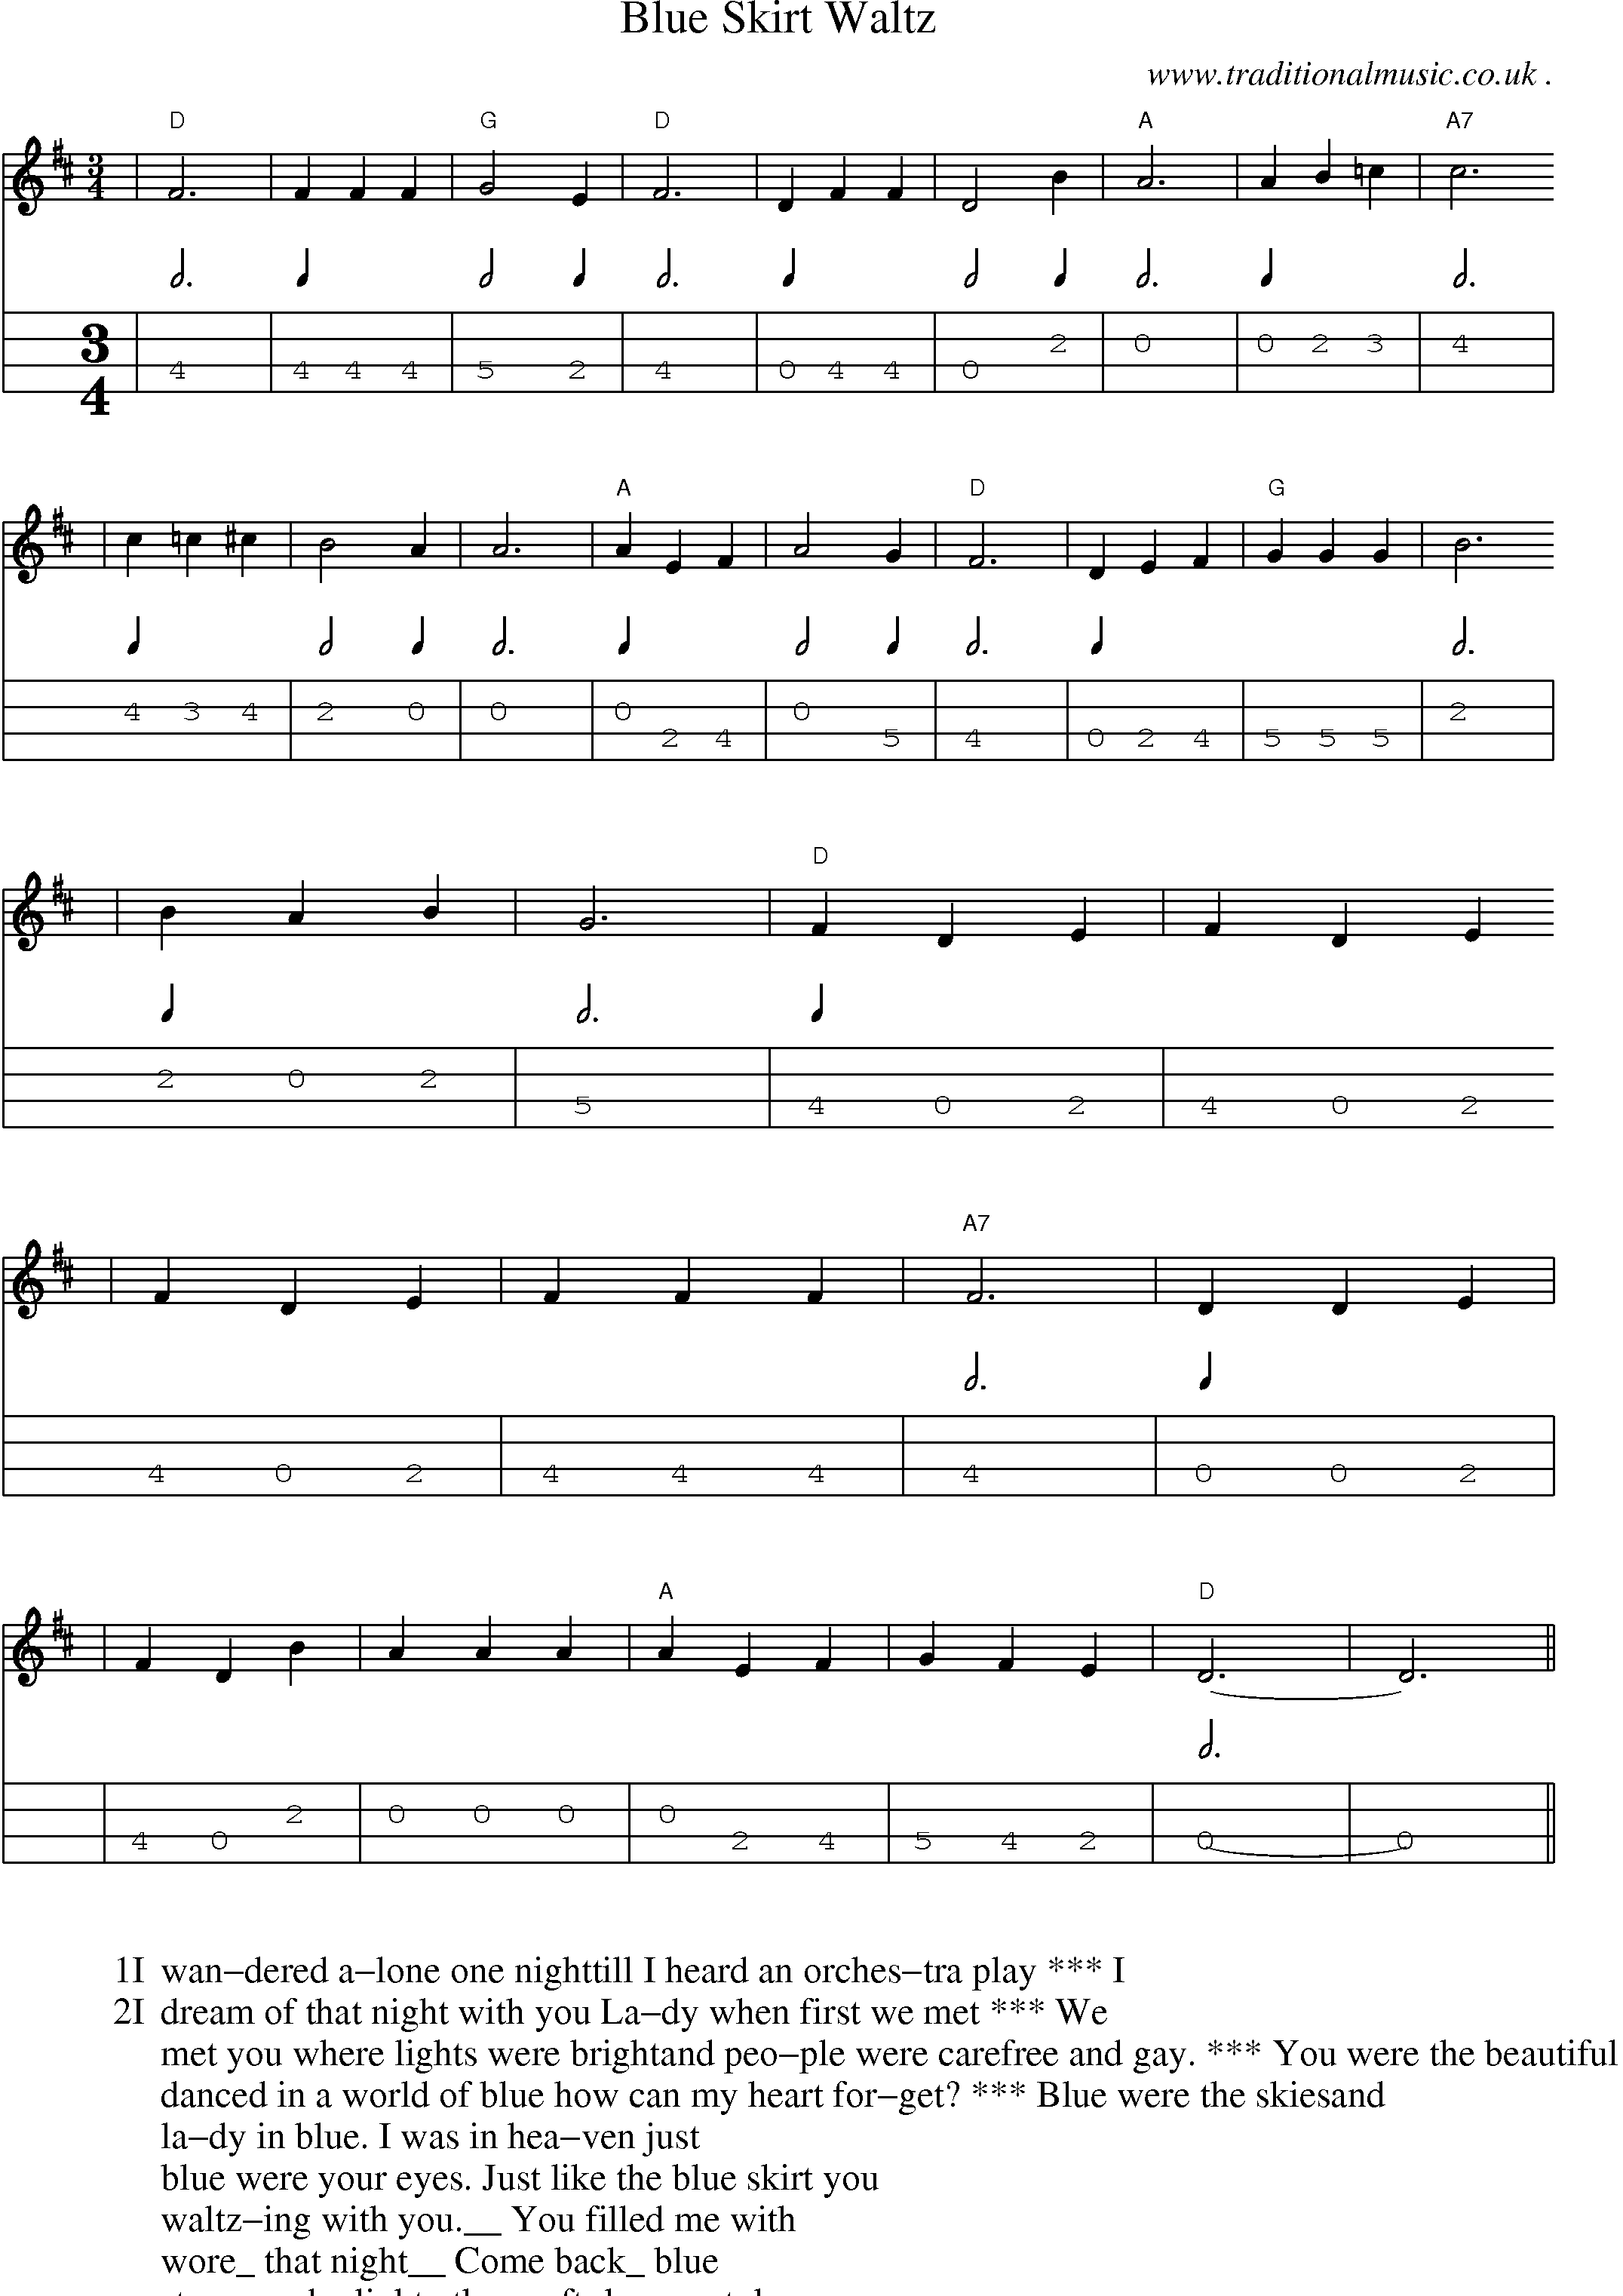 Music Score and Mandolin Tabs for Blue Skirt Waltz